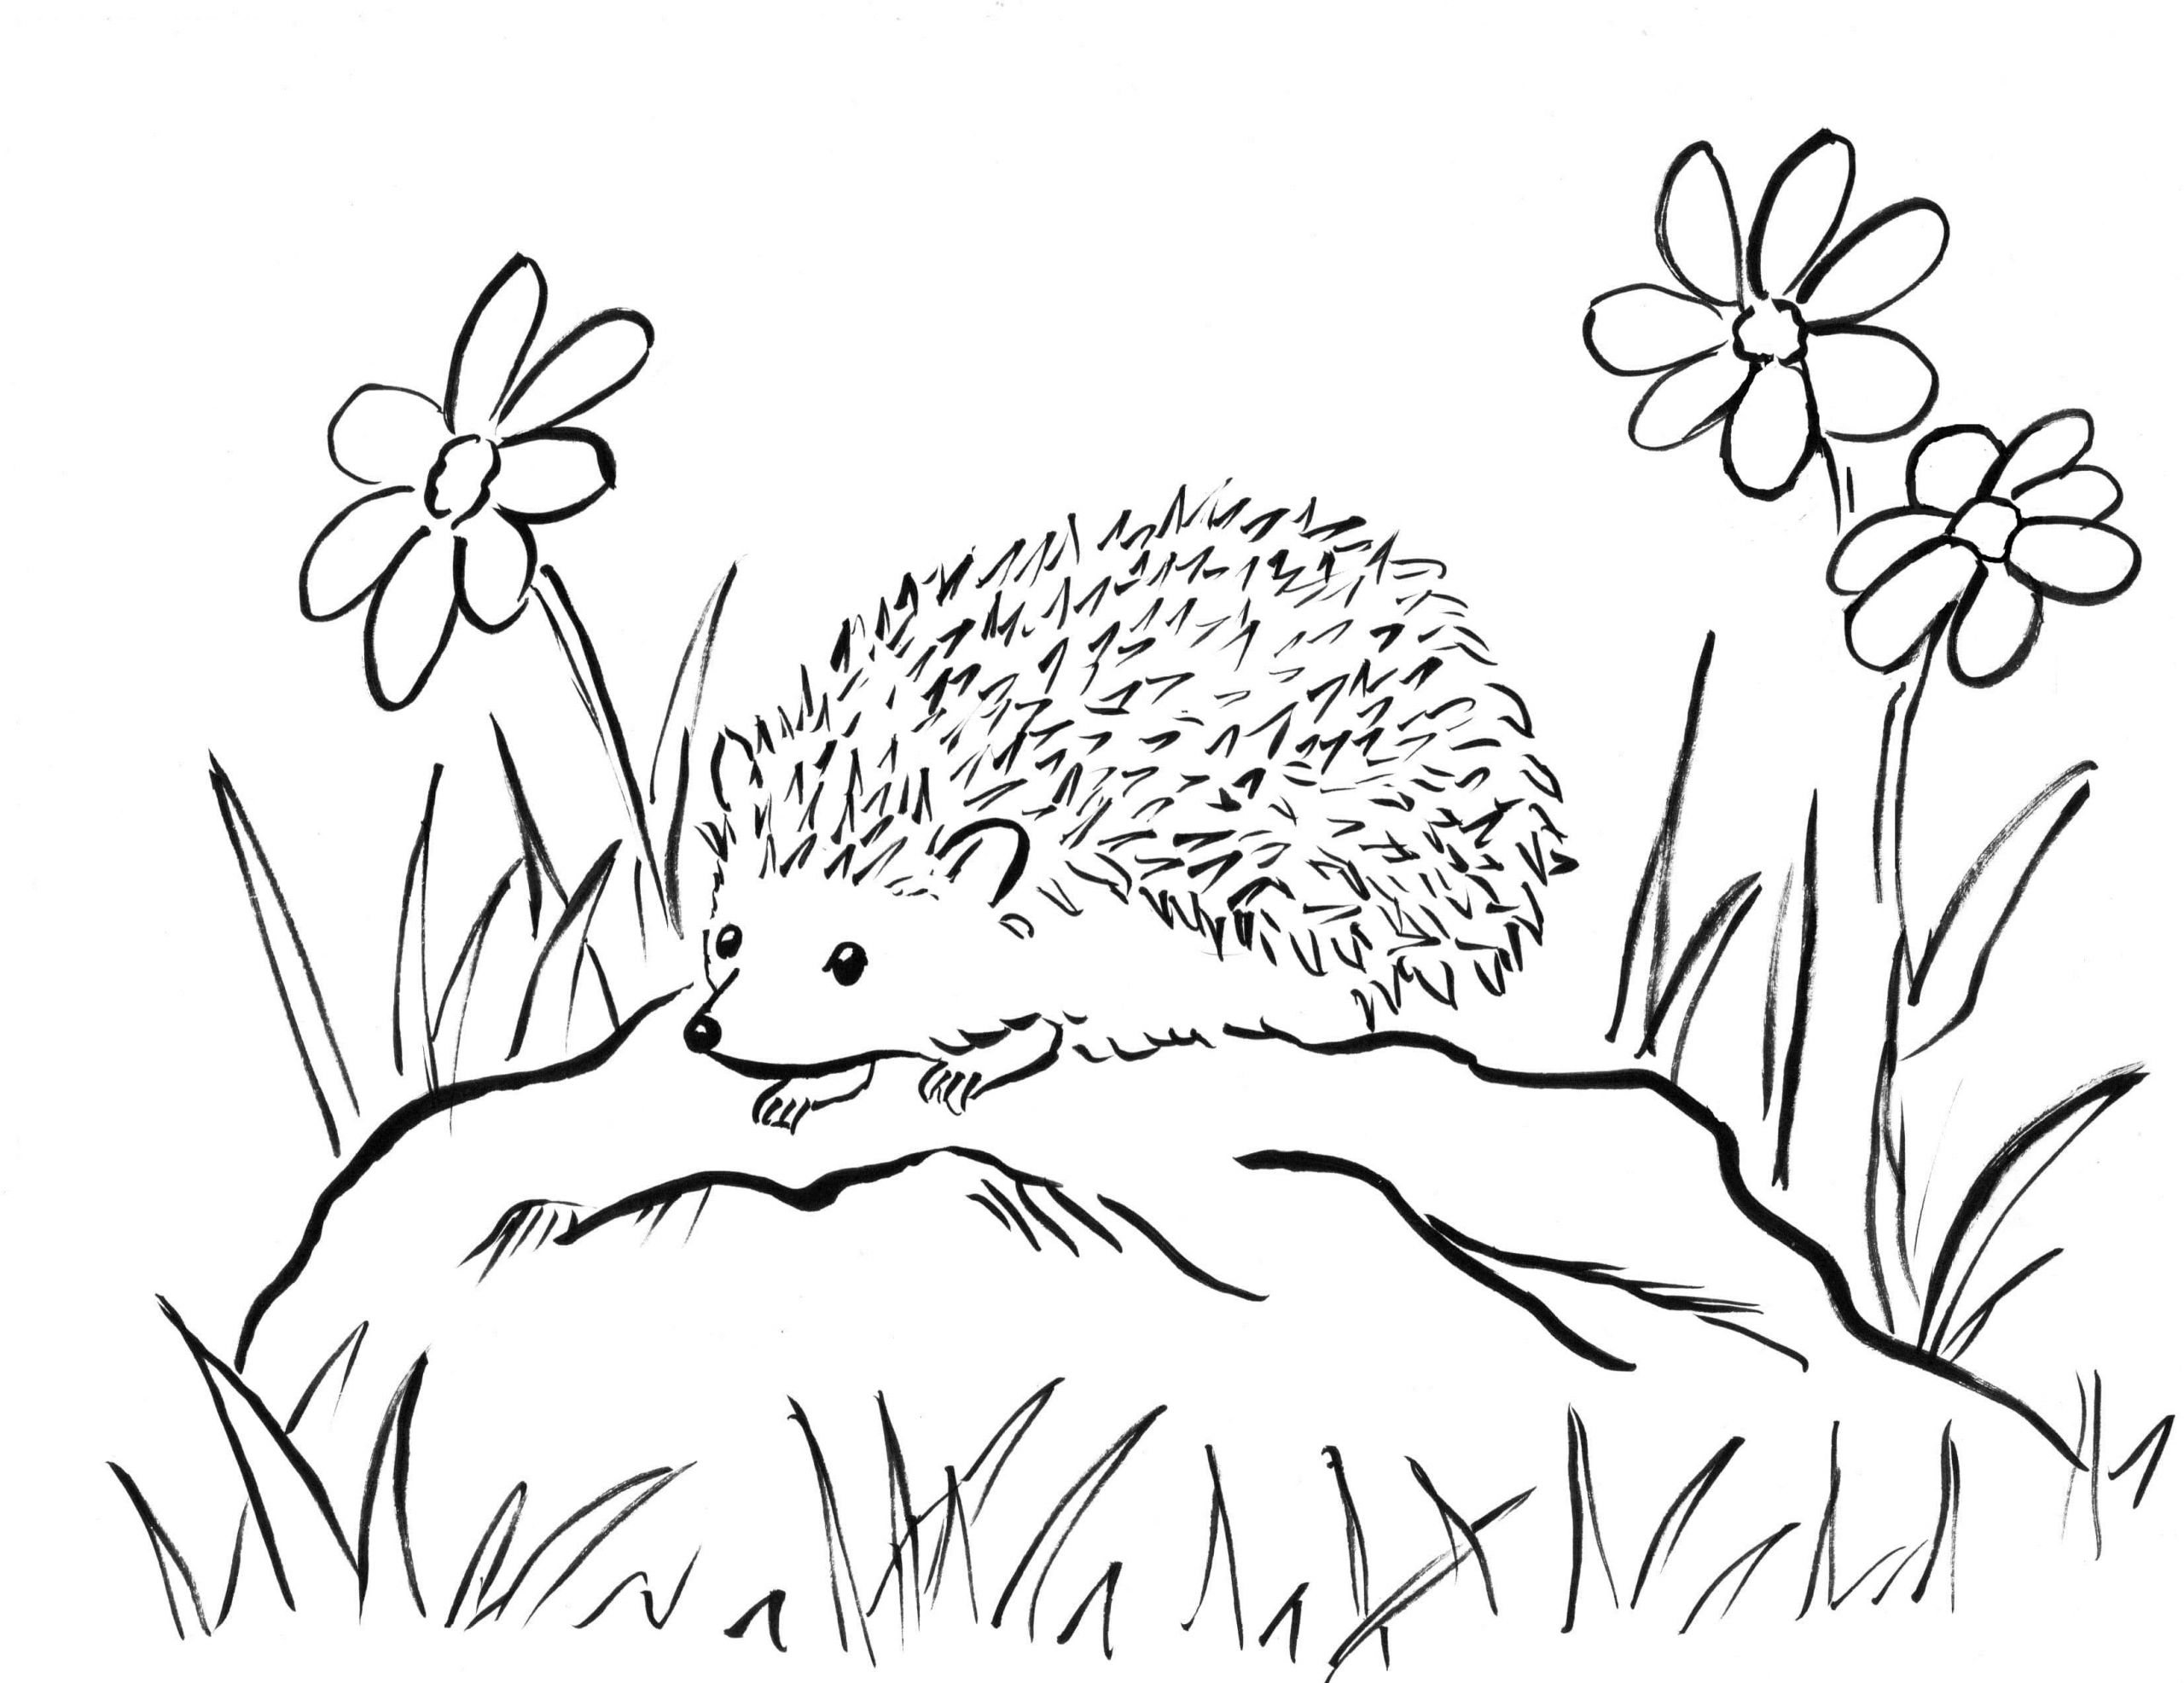 Baby Hedgehog Coloring Pages
 Hedgehog Coloring Pages for Children 100 Print